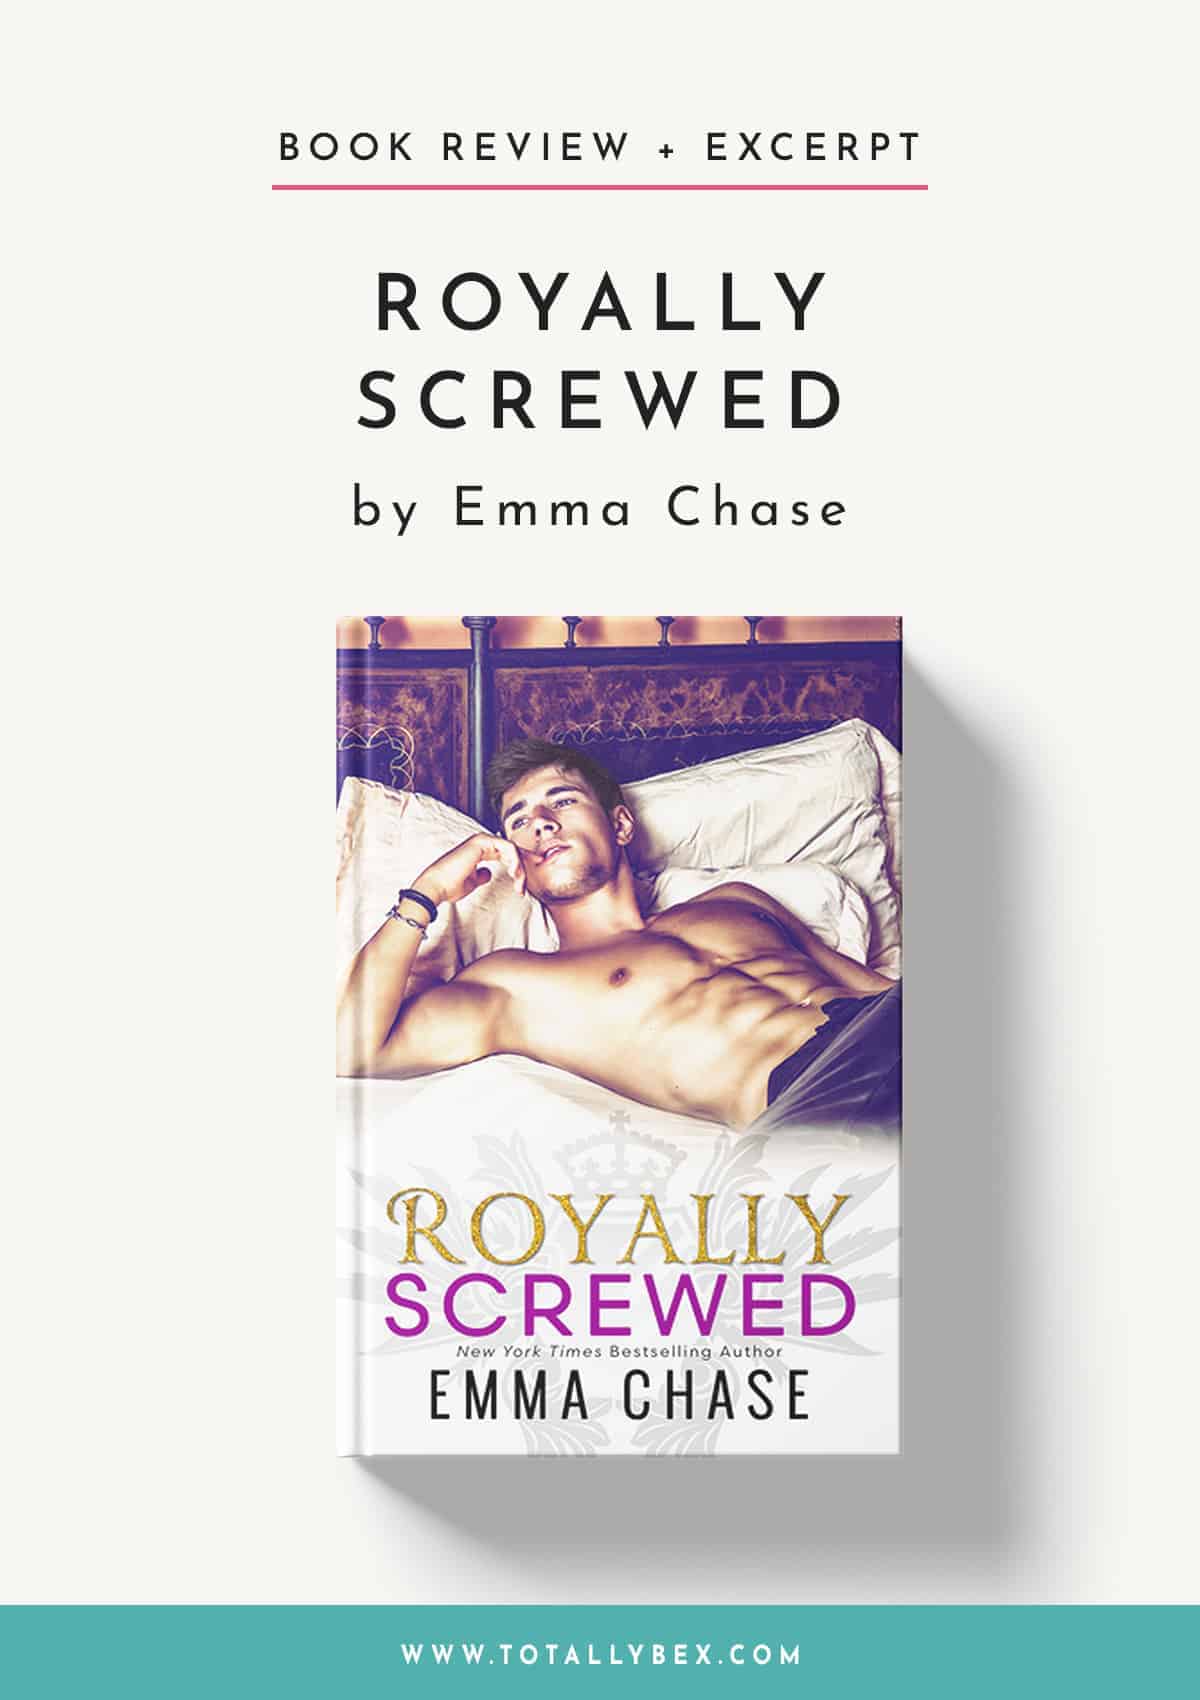 Royally Screwed by Emma Chase-Book Review+Excerpt